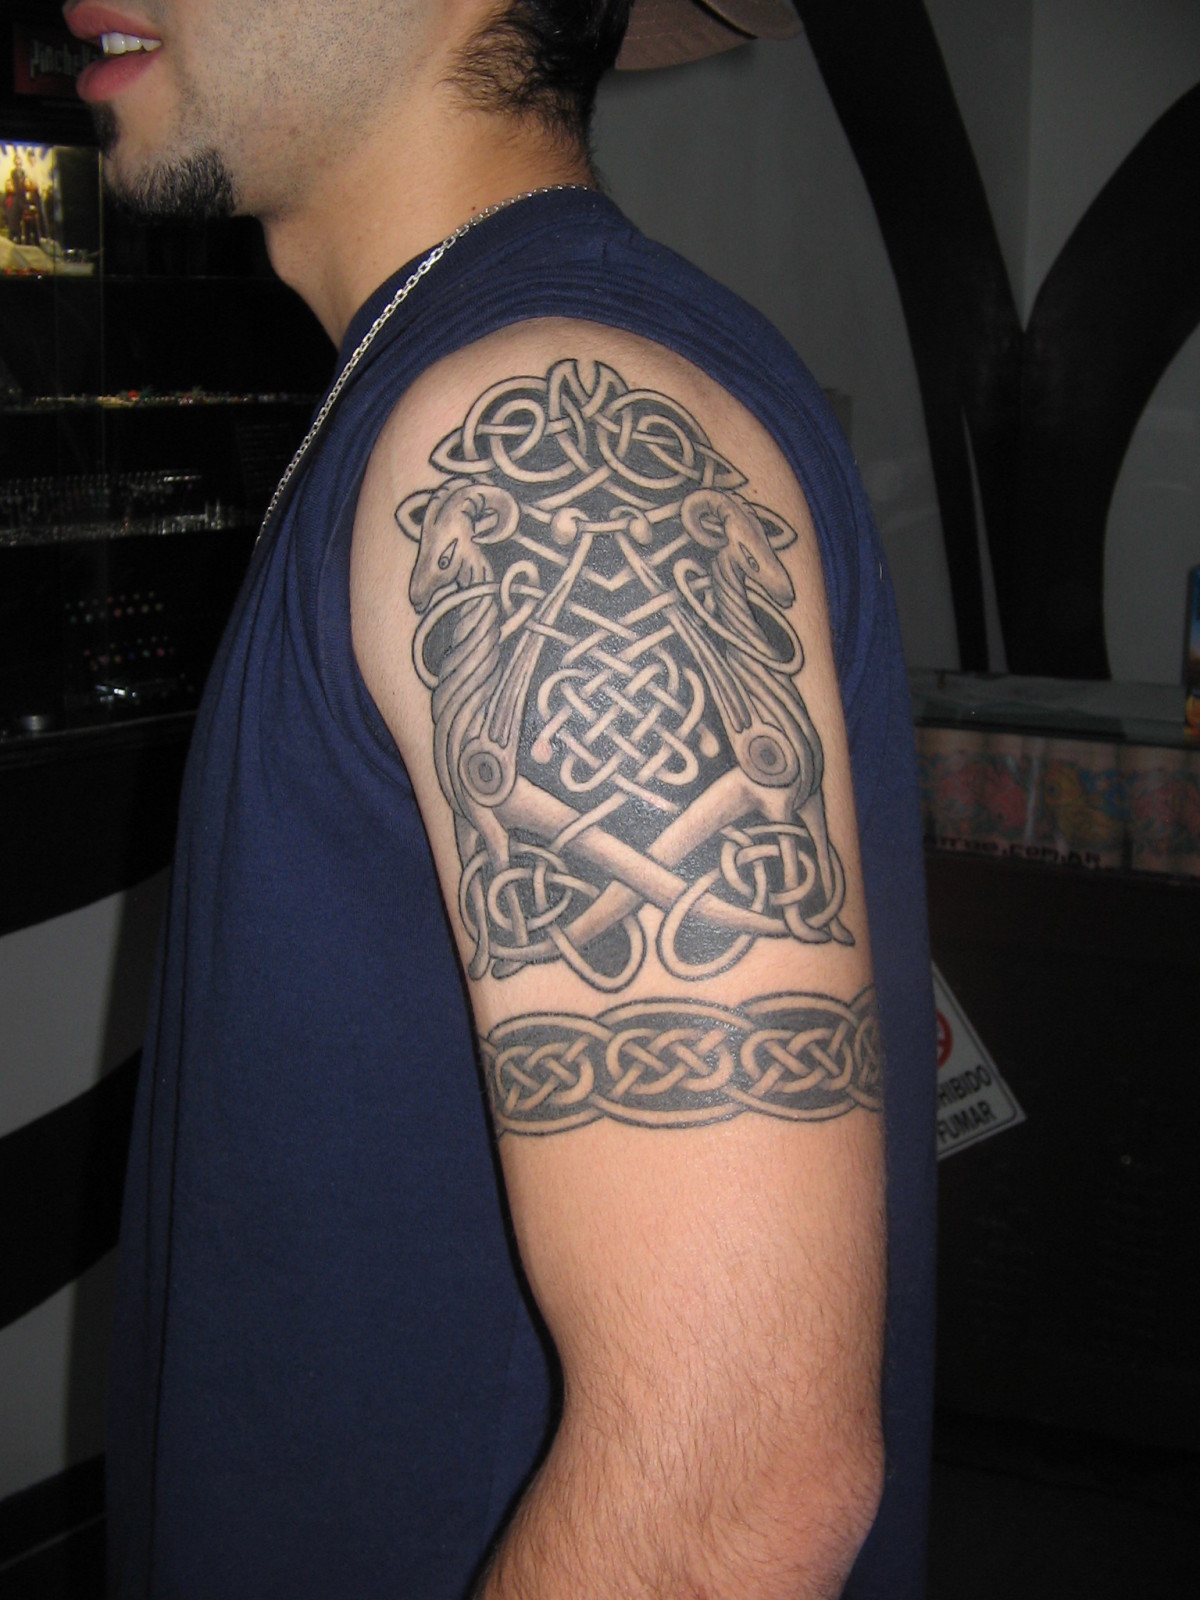 Best Of The Hottest Tattoos Ideas Celebrated Cool Arm Tattoos with regard to sizing 1200 X 1600